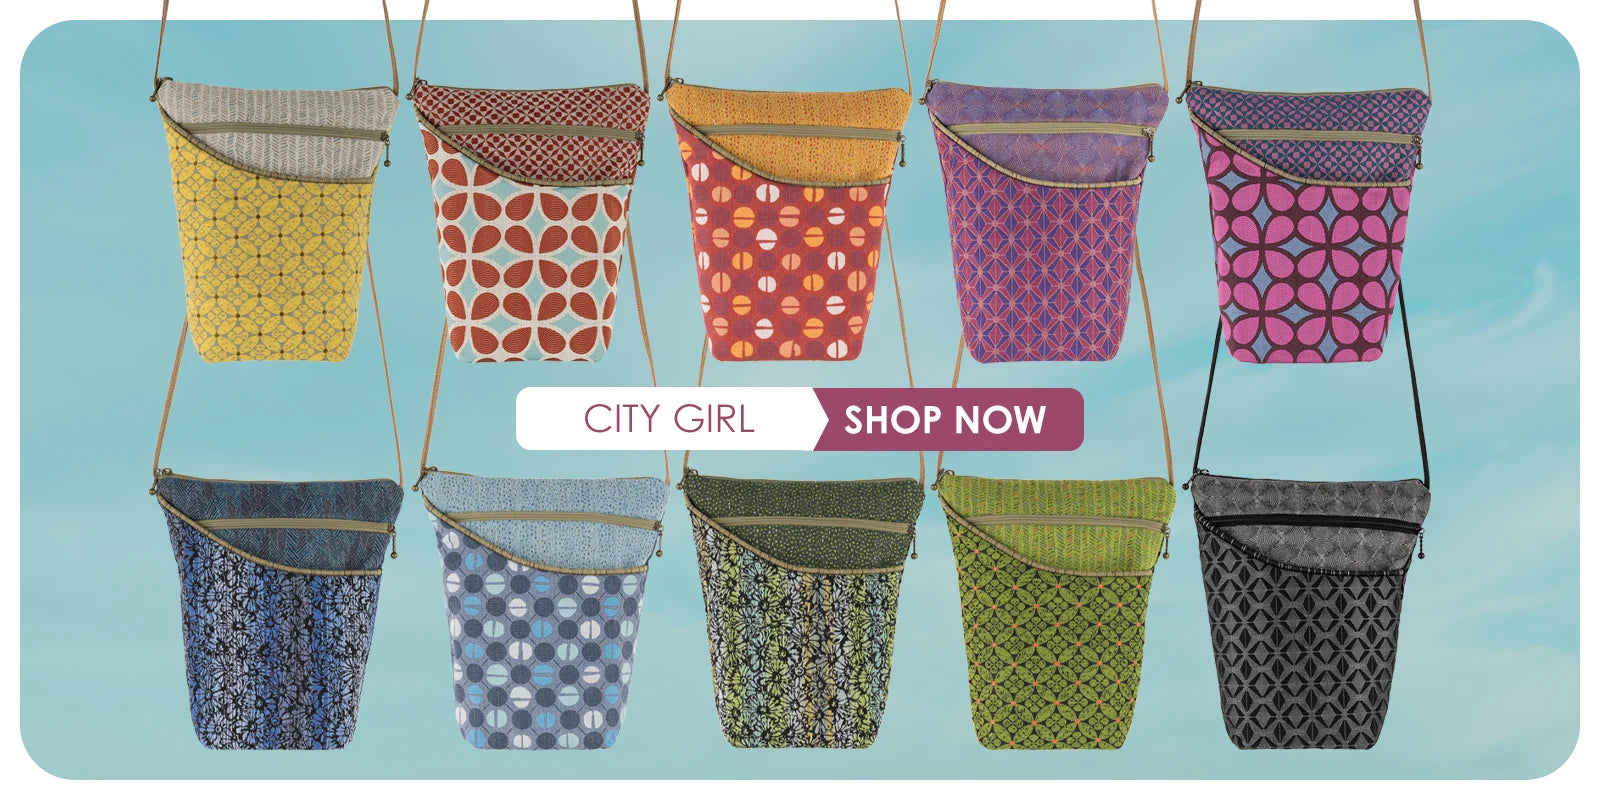 Shop Maruca's City Girl. A great mid-sized crossbody bag for every day use.